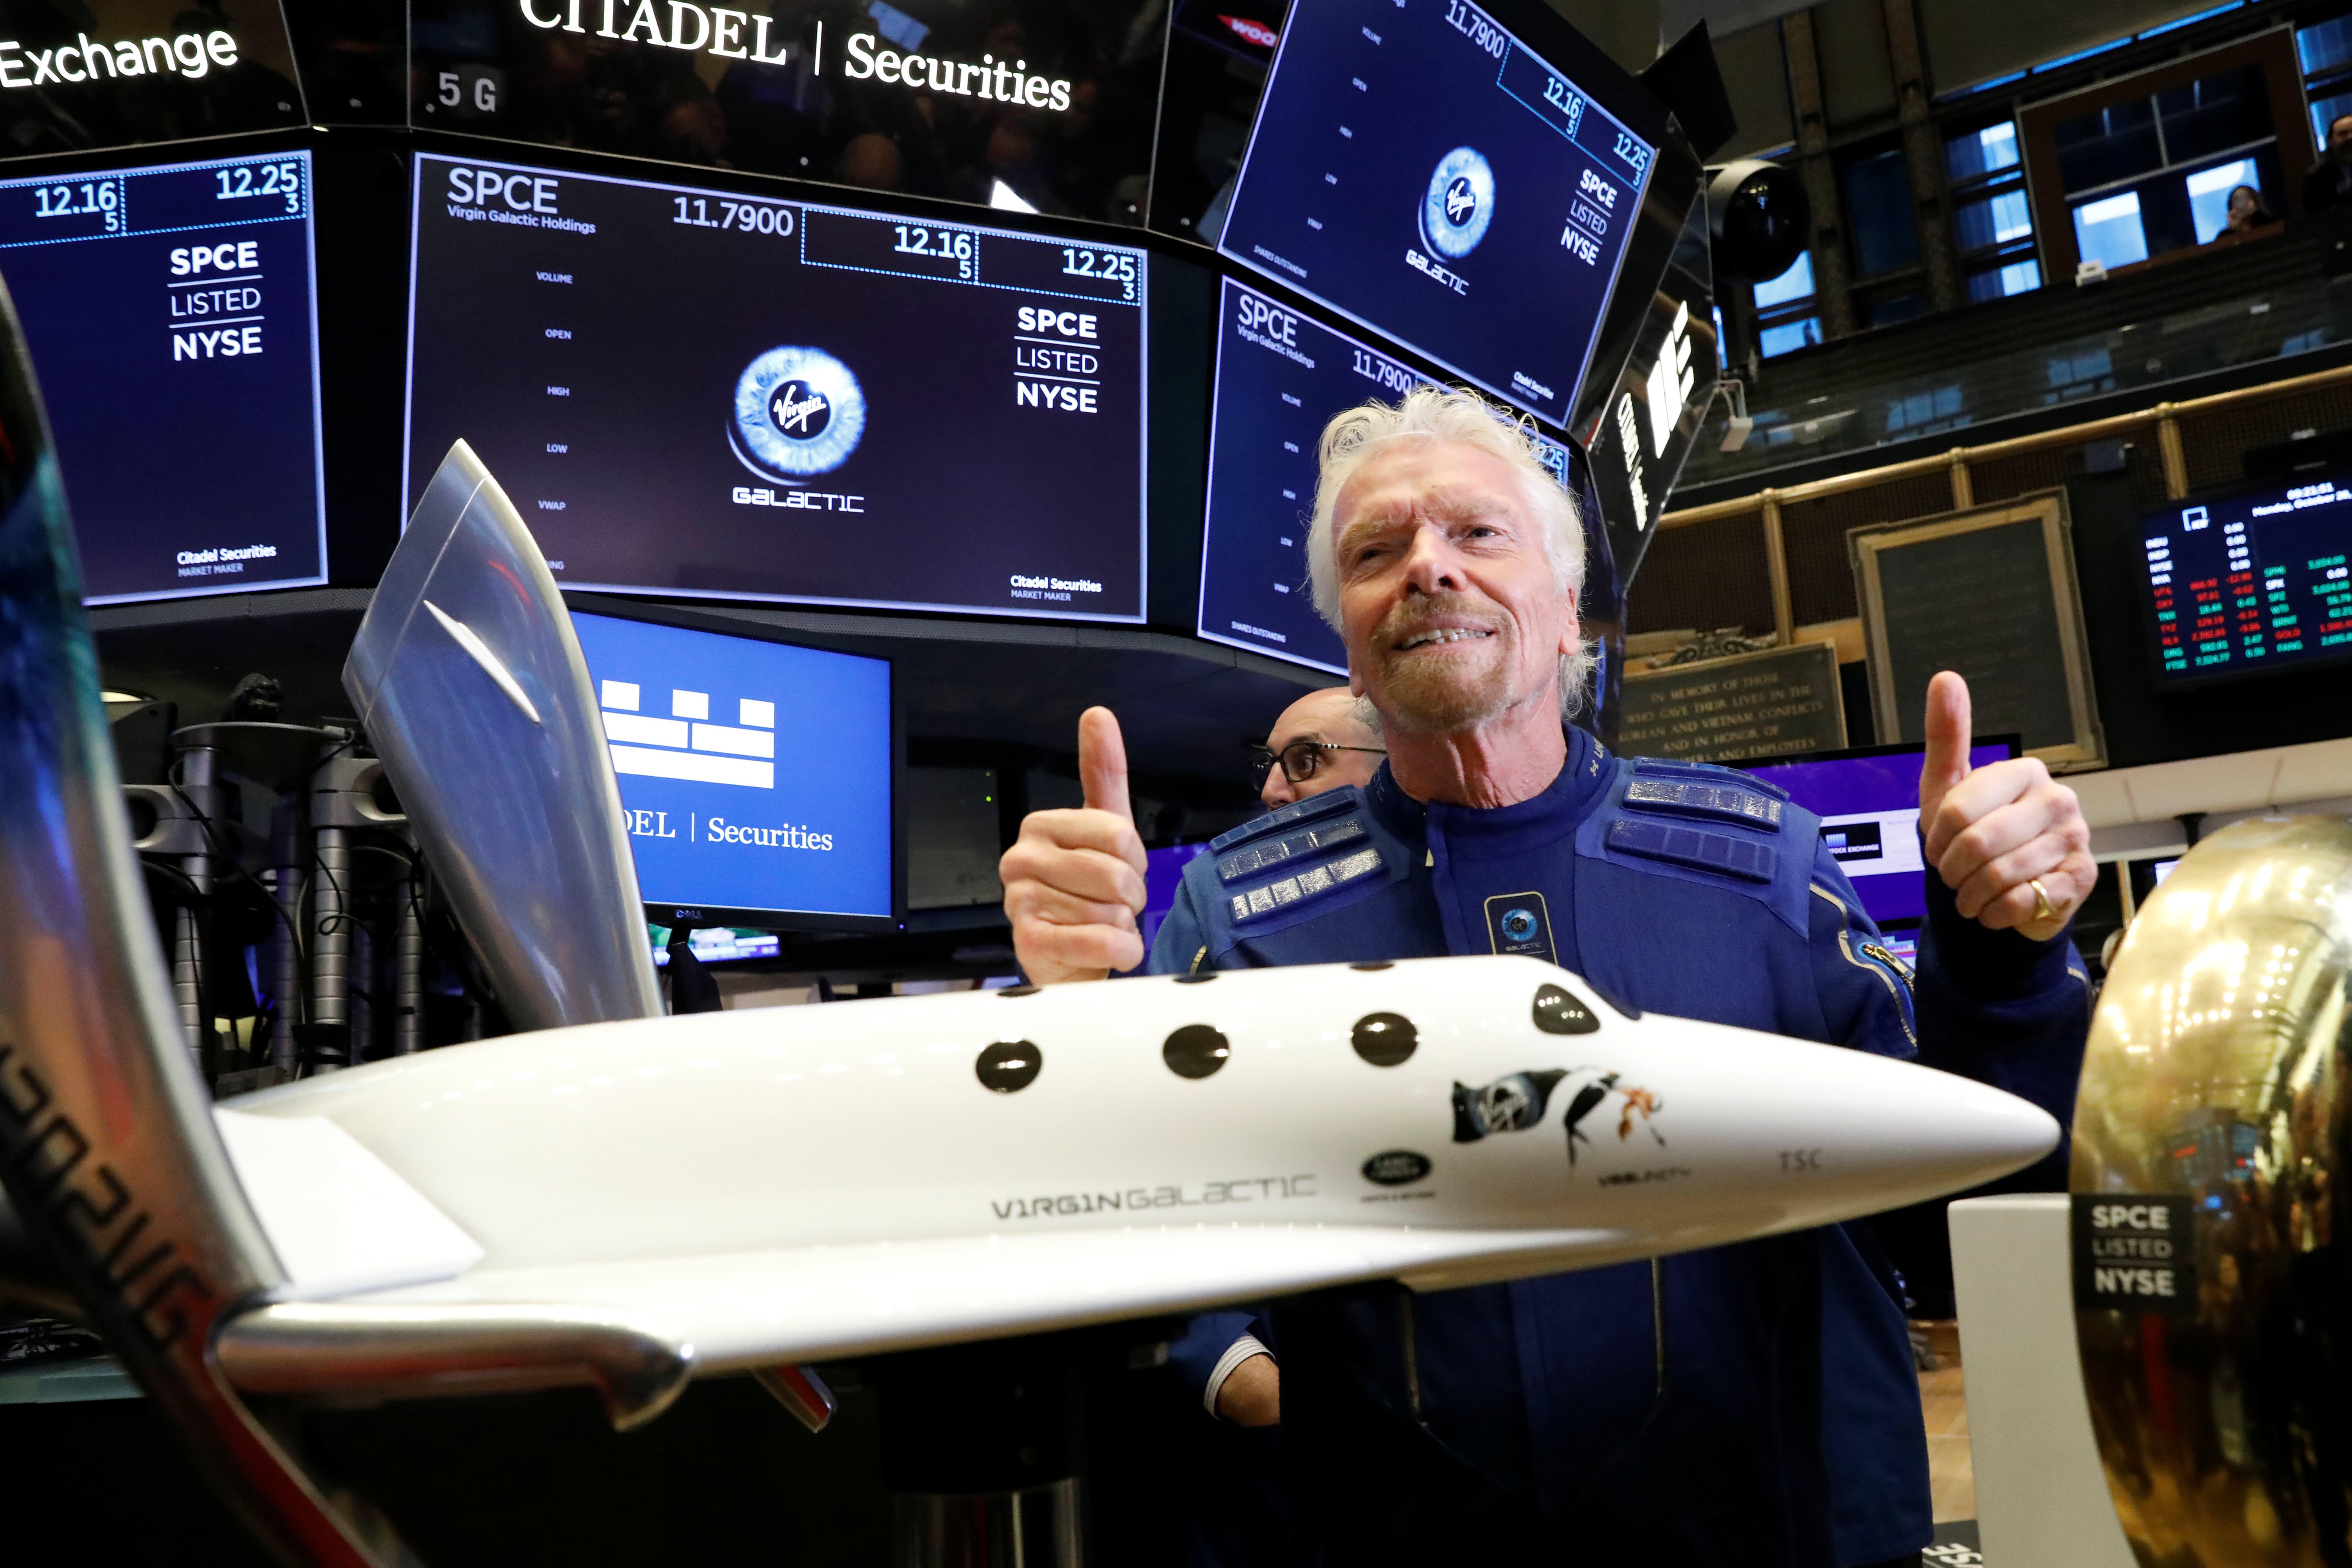 Virgin Galactic completes first spaceflight in over two years, in step toward finishing development